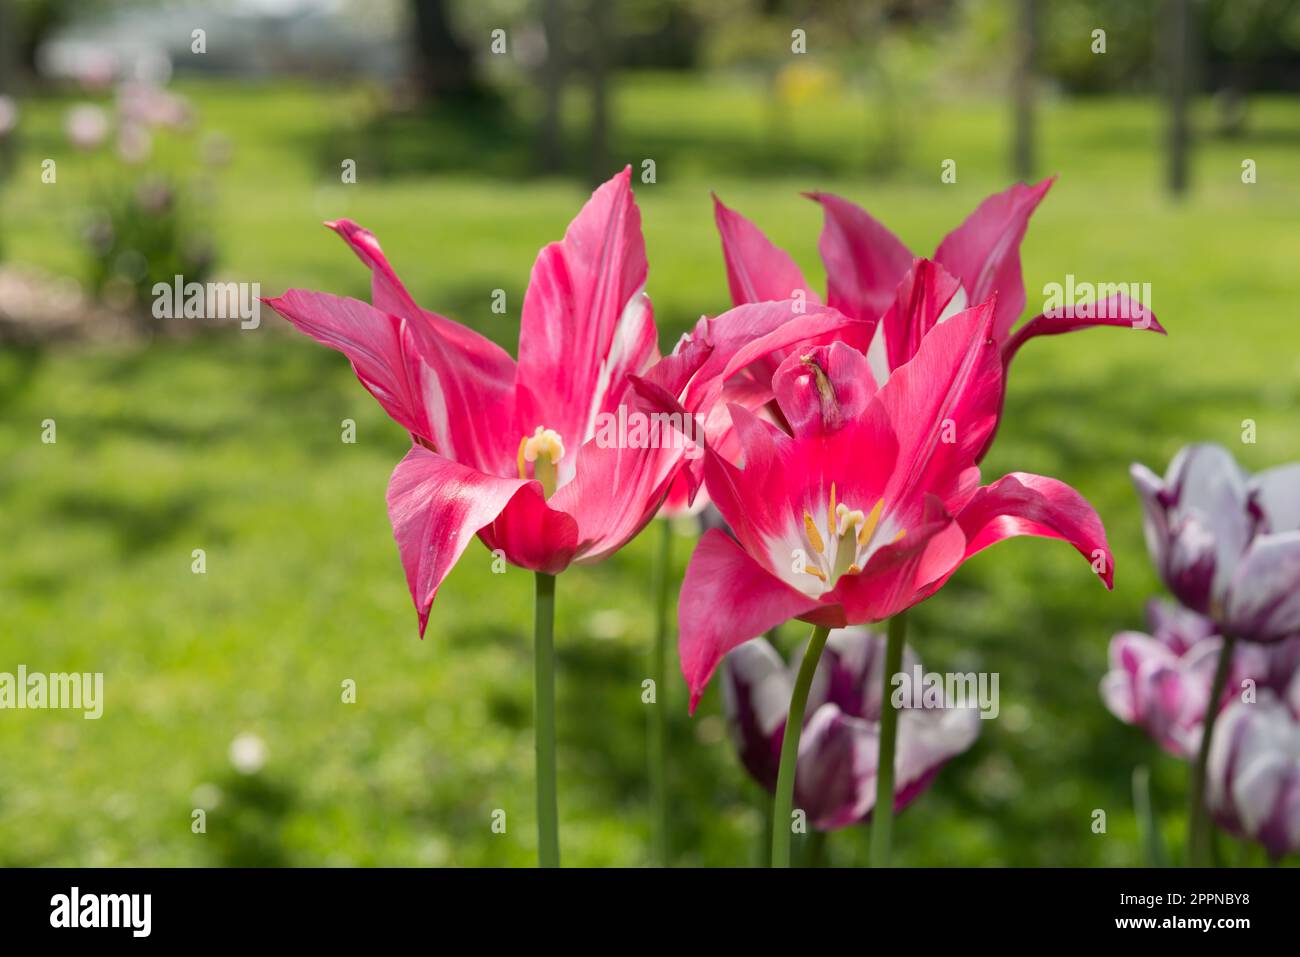 variegated pink and white striped star shaped tulips in bloom in an orchard Stock Photo